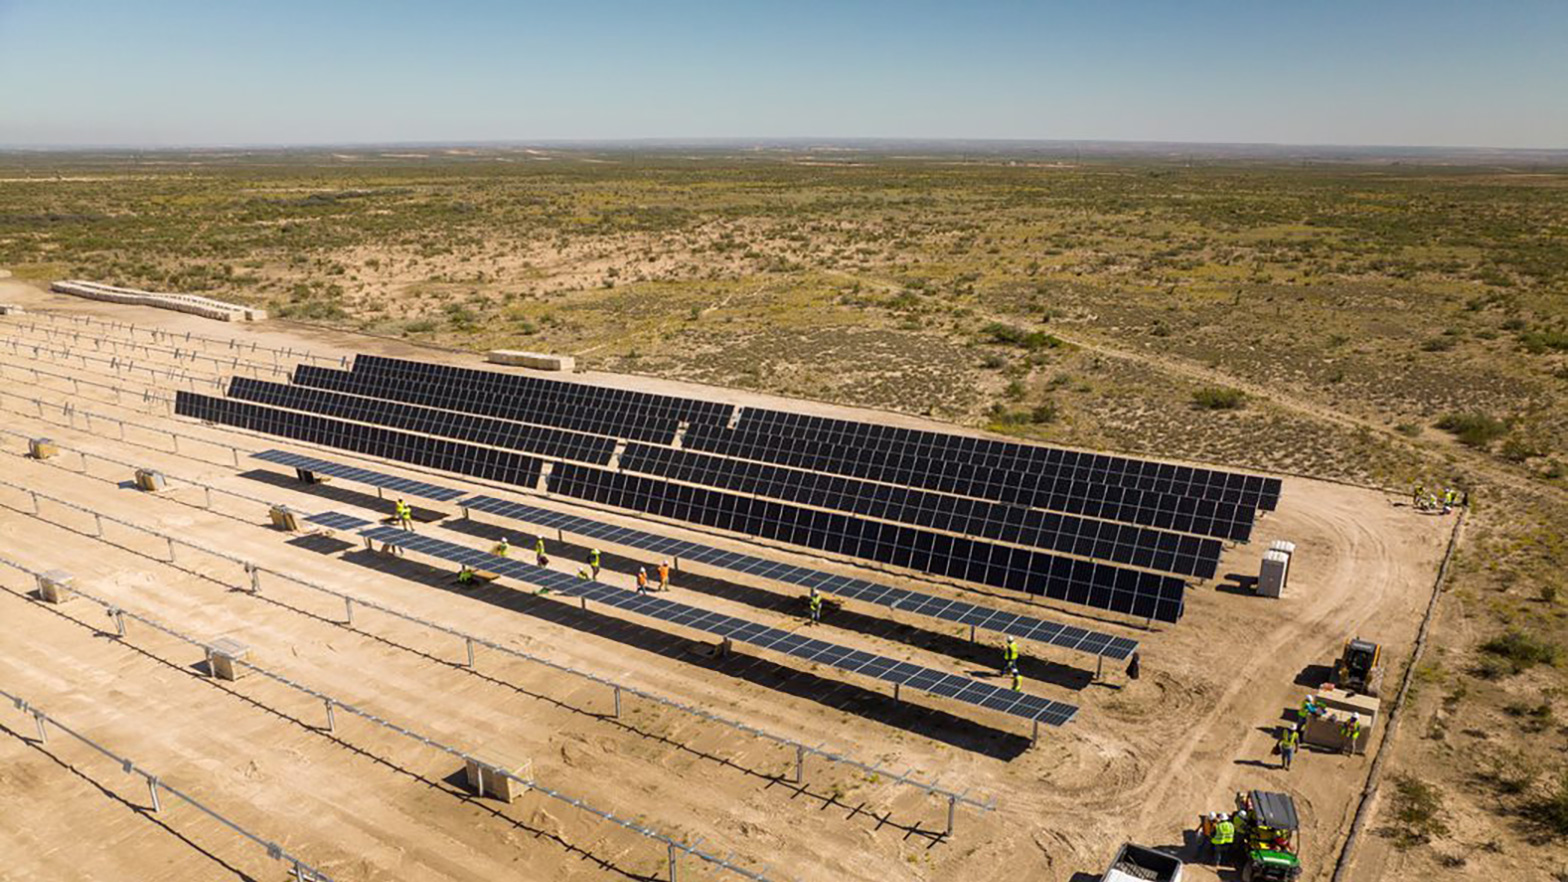 Aerial view of a solar array under construction in Hayhurst, New Mexico. These panels will help power Chevron’s nearby Permian Basin operations.